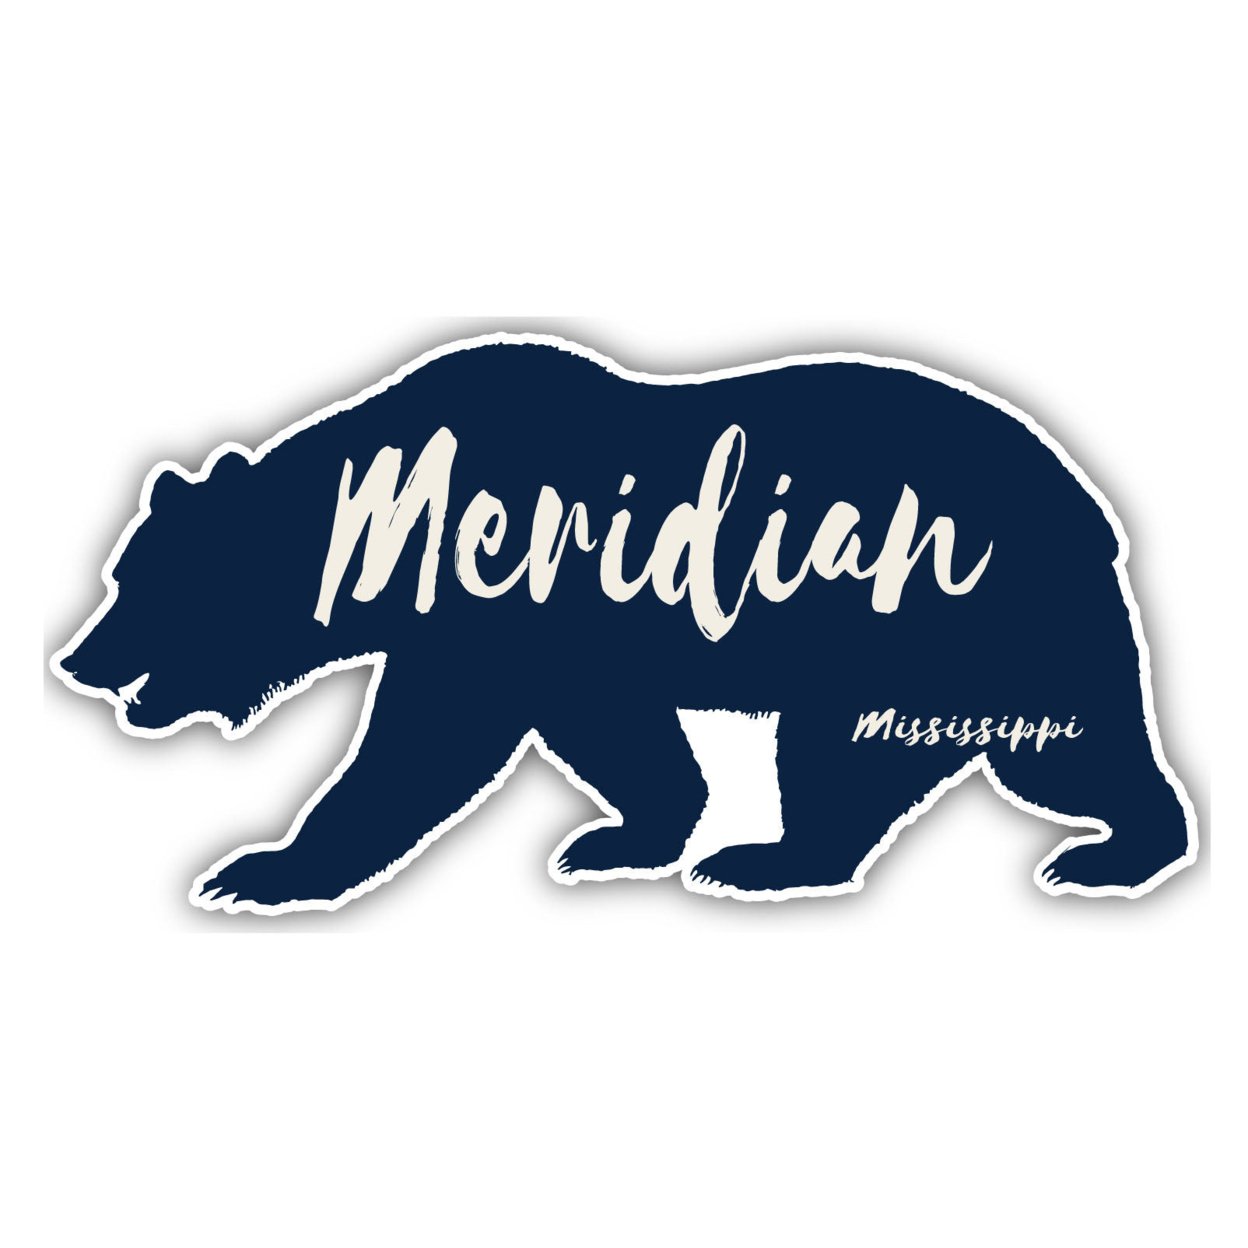 Meridian Mississippi Souvenir Decorative Stickers (Choose Theme And Size) - 2-Inch, Bear